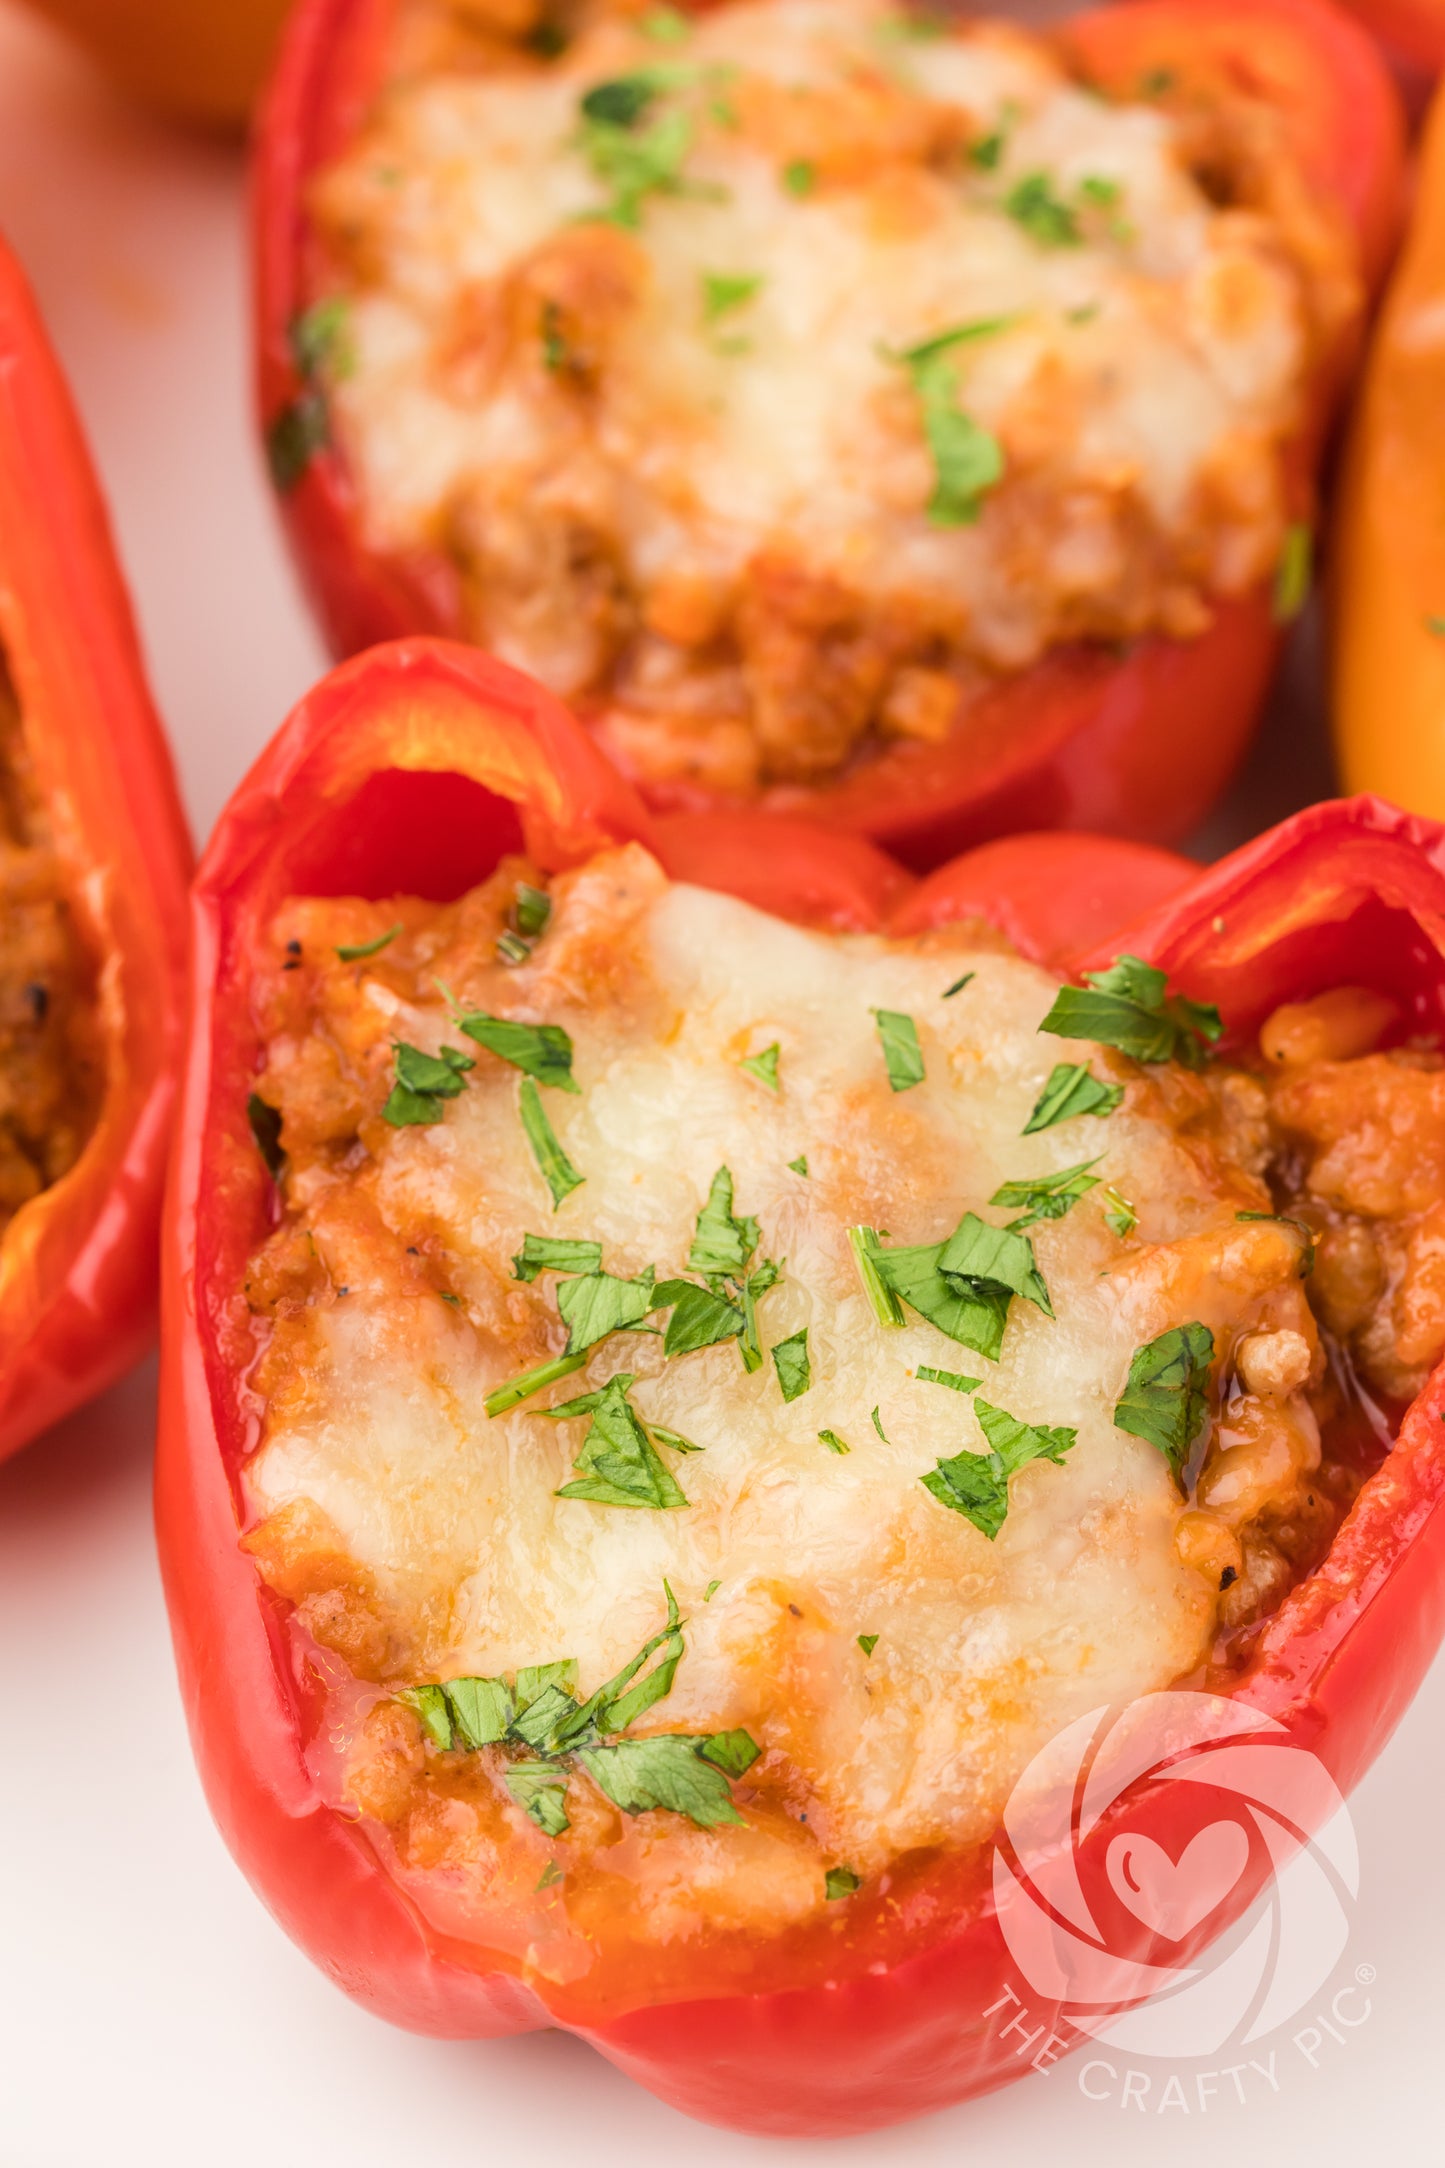 Ground Turkey Stuffed Peppers - EXCLUSIVE